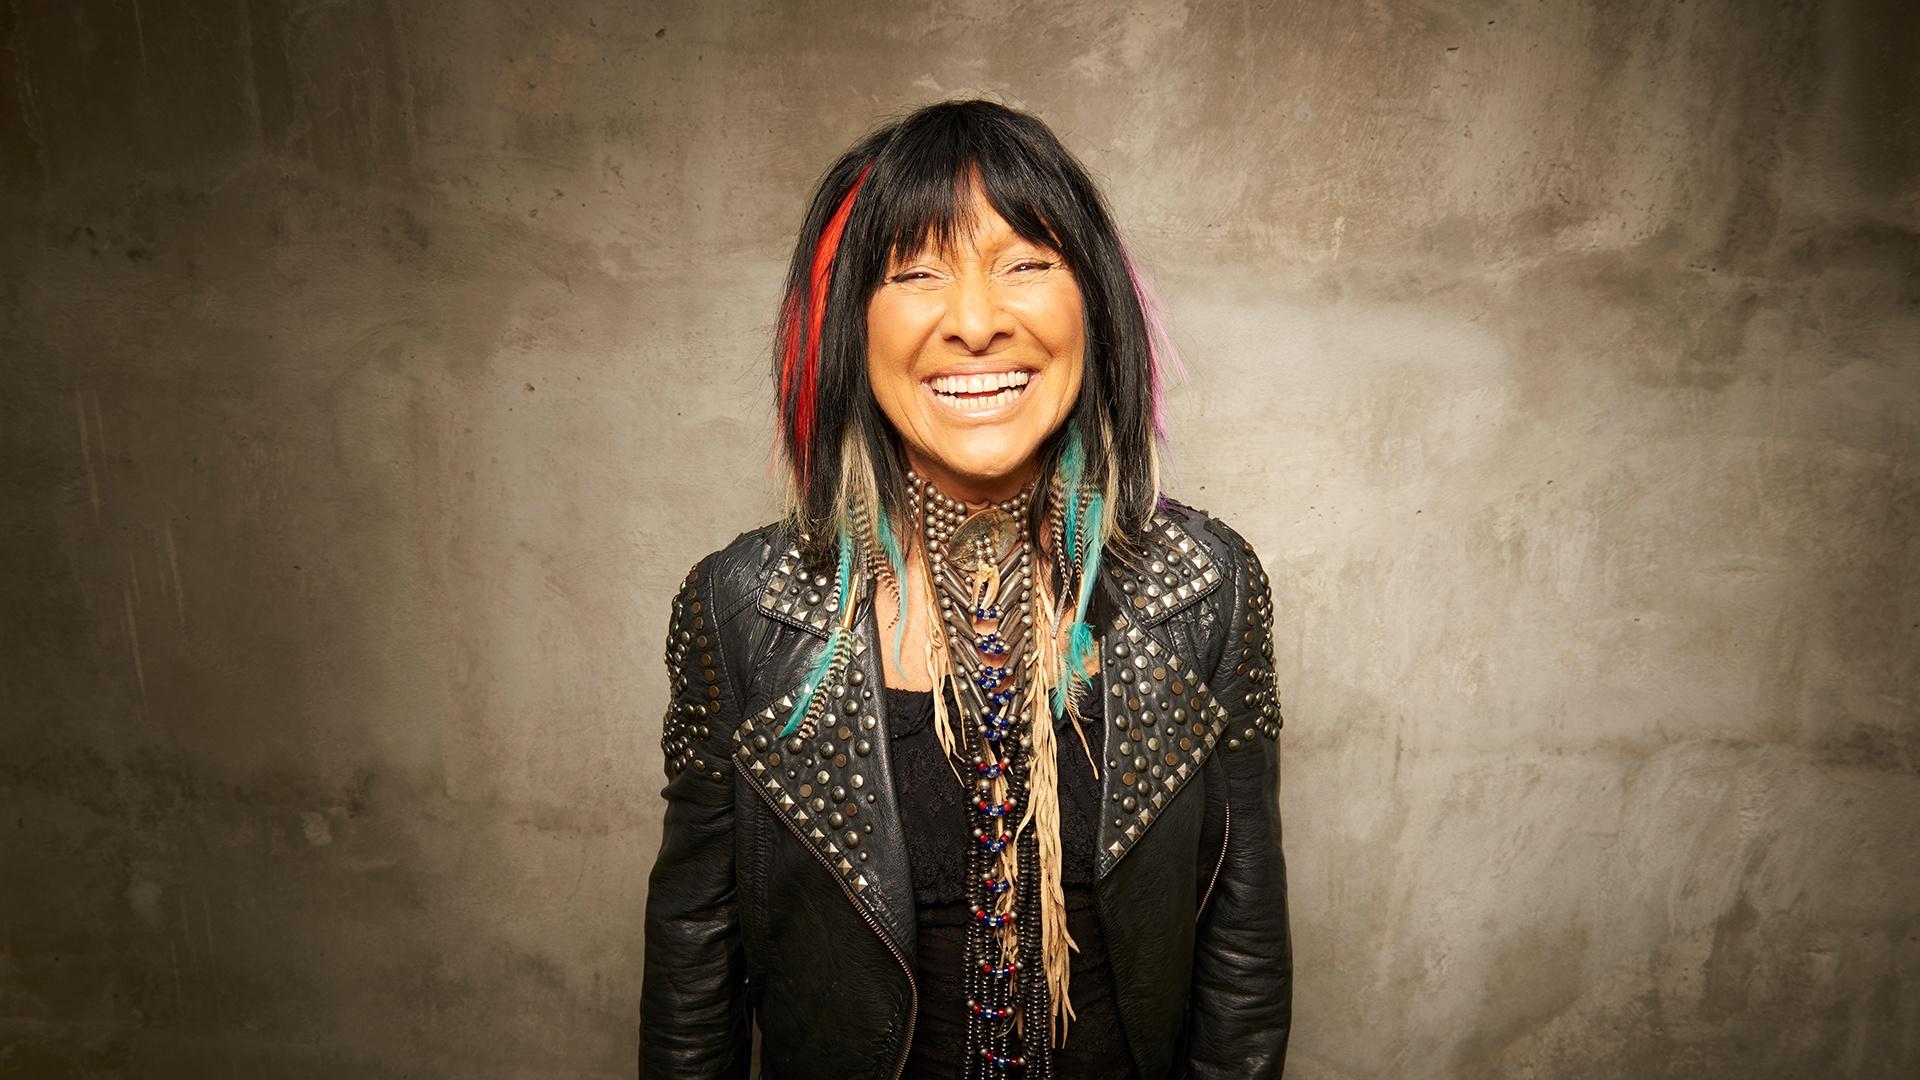 Buffy Sainte-Marie: Carry It On is the story of the Oscar-winning Indigenous artist from her rise to prominence in the folk music scene through her groundbreaking career as a singer-songwriter, social activist, educator and artist. Premieres November 22 on PBS 6.